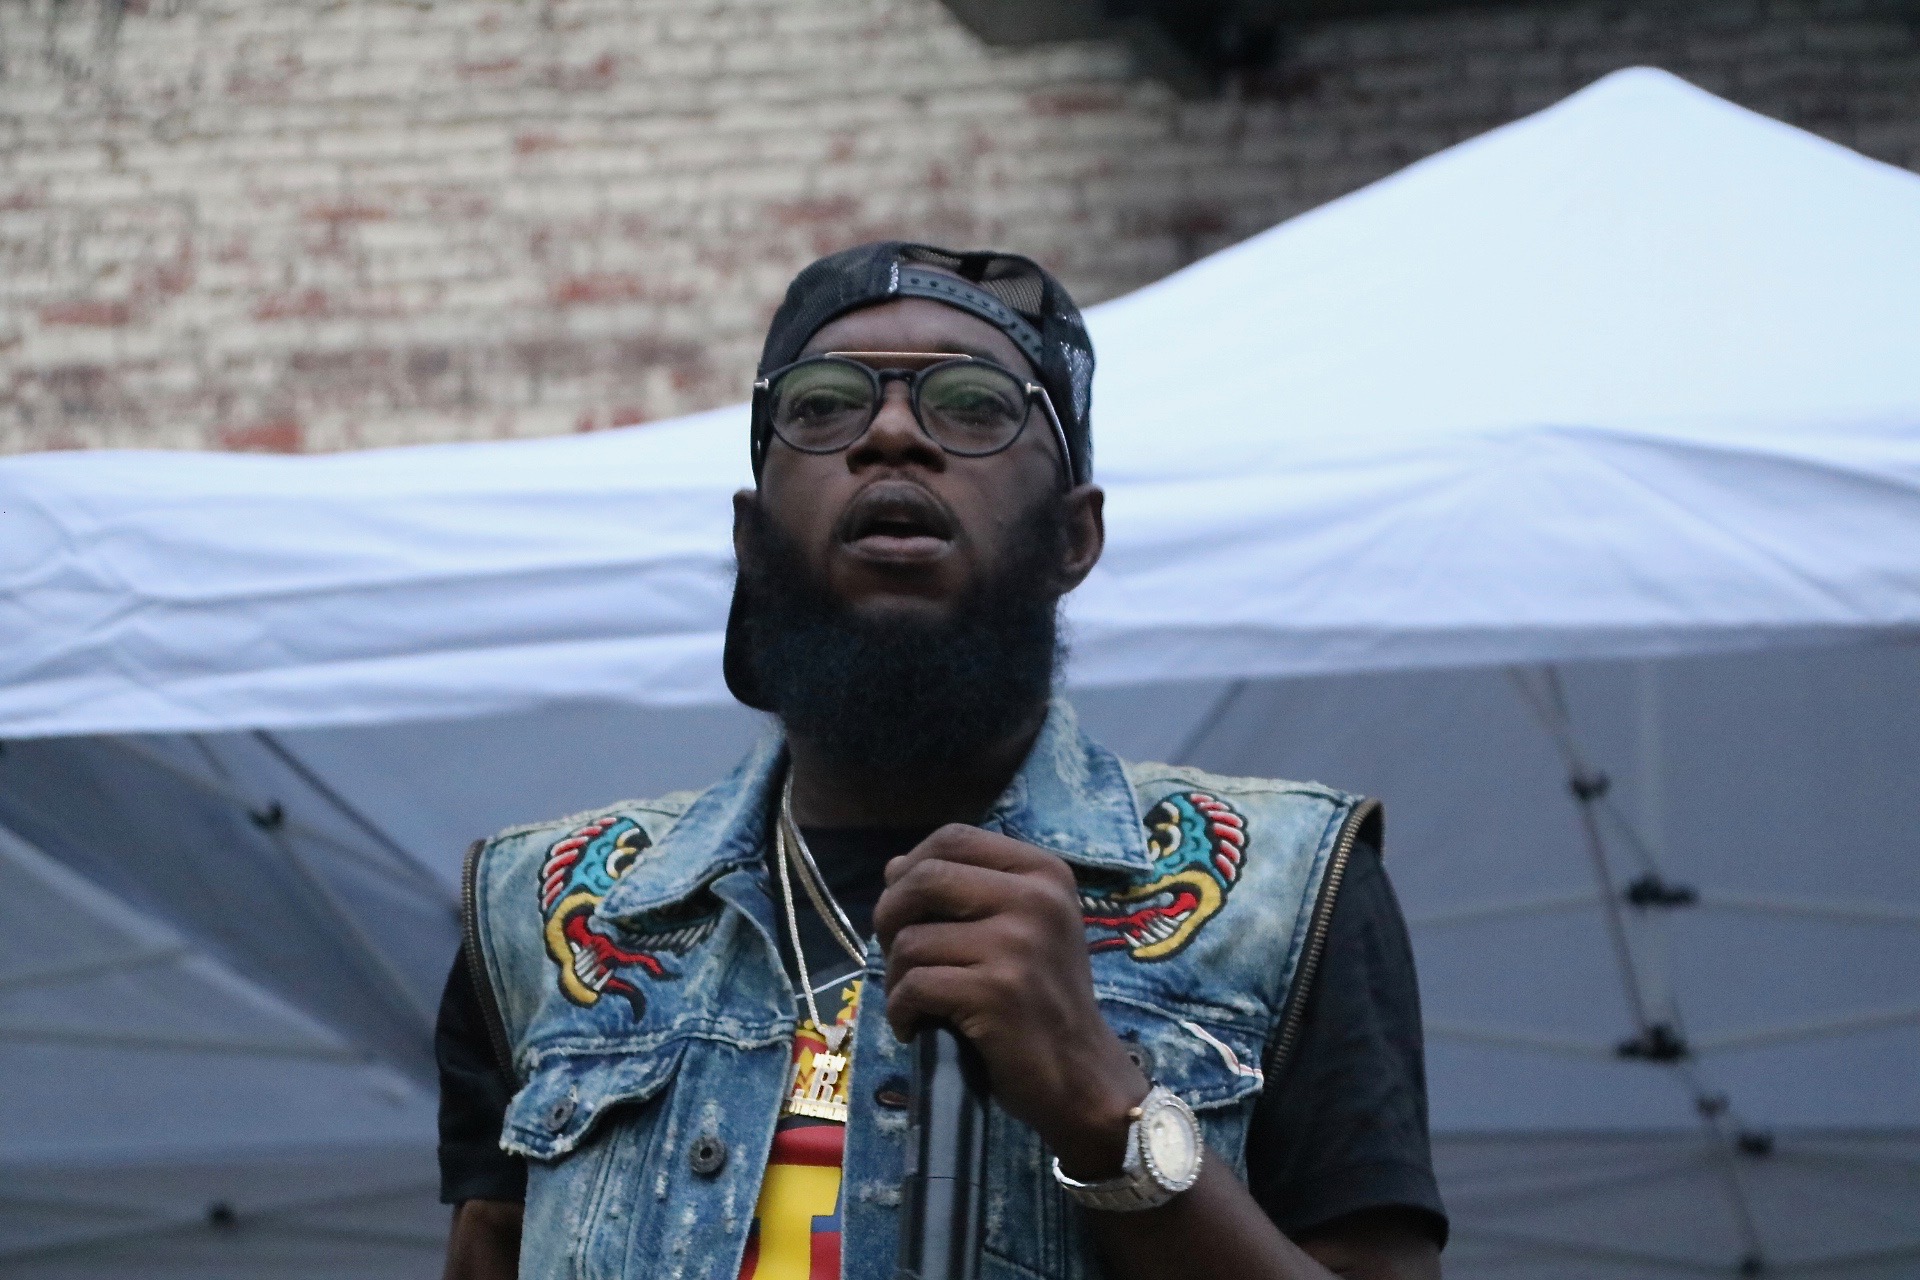 EXCLUSIVE: FREEWAY TALKS ABOUT HIS BATTLE WITH CASSIDY